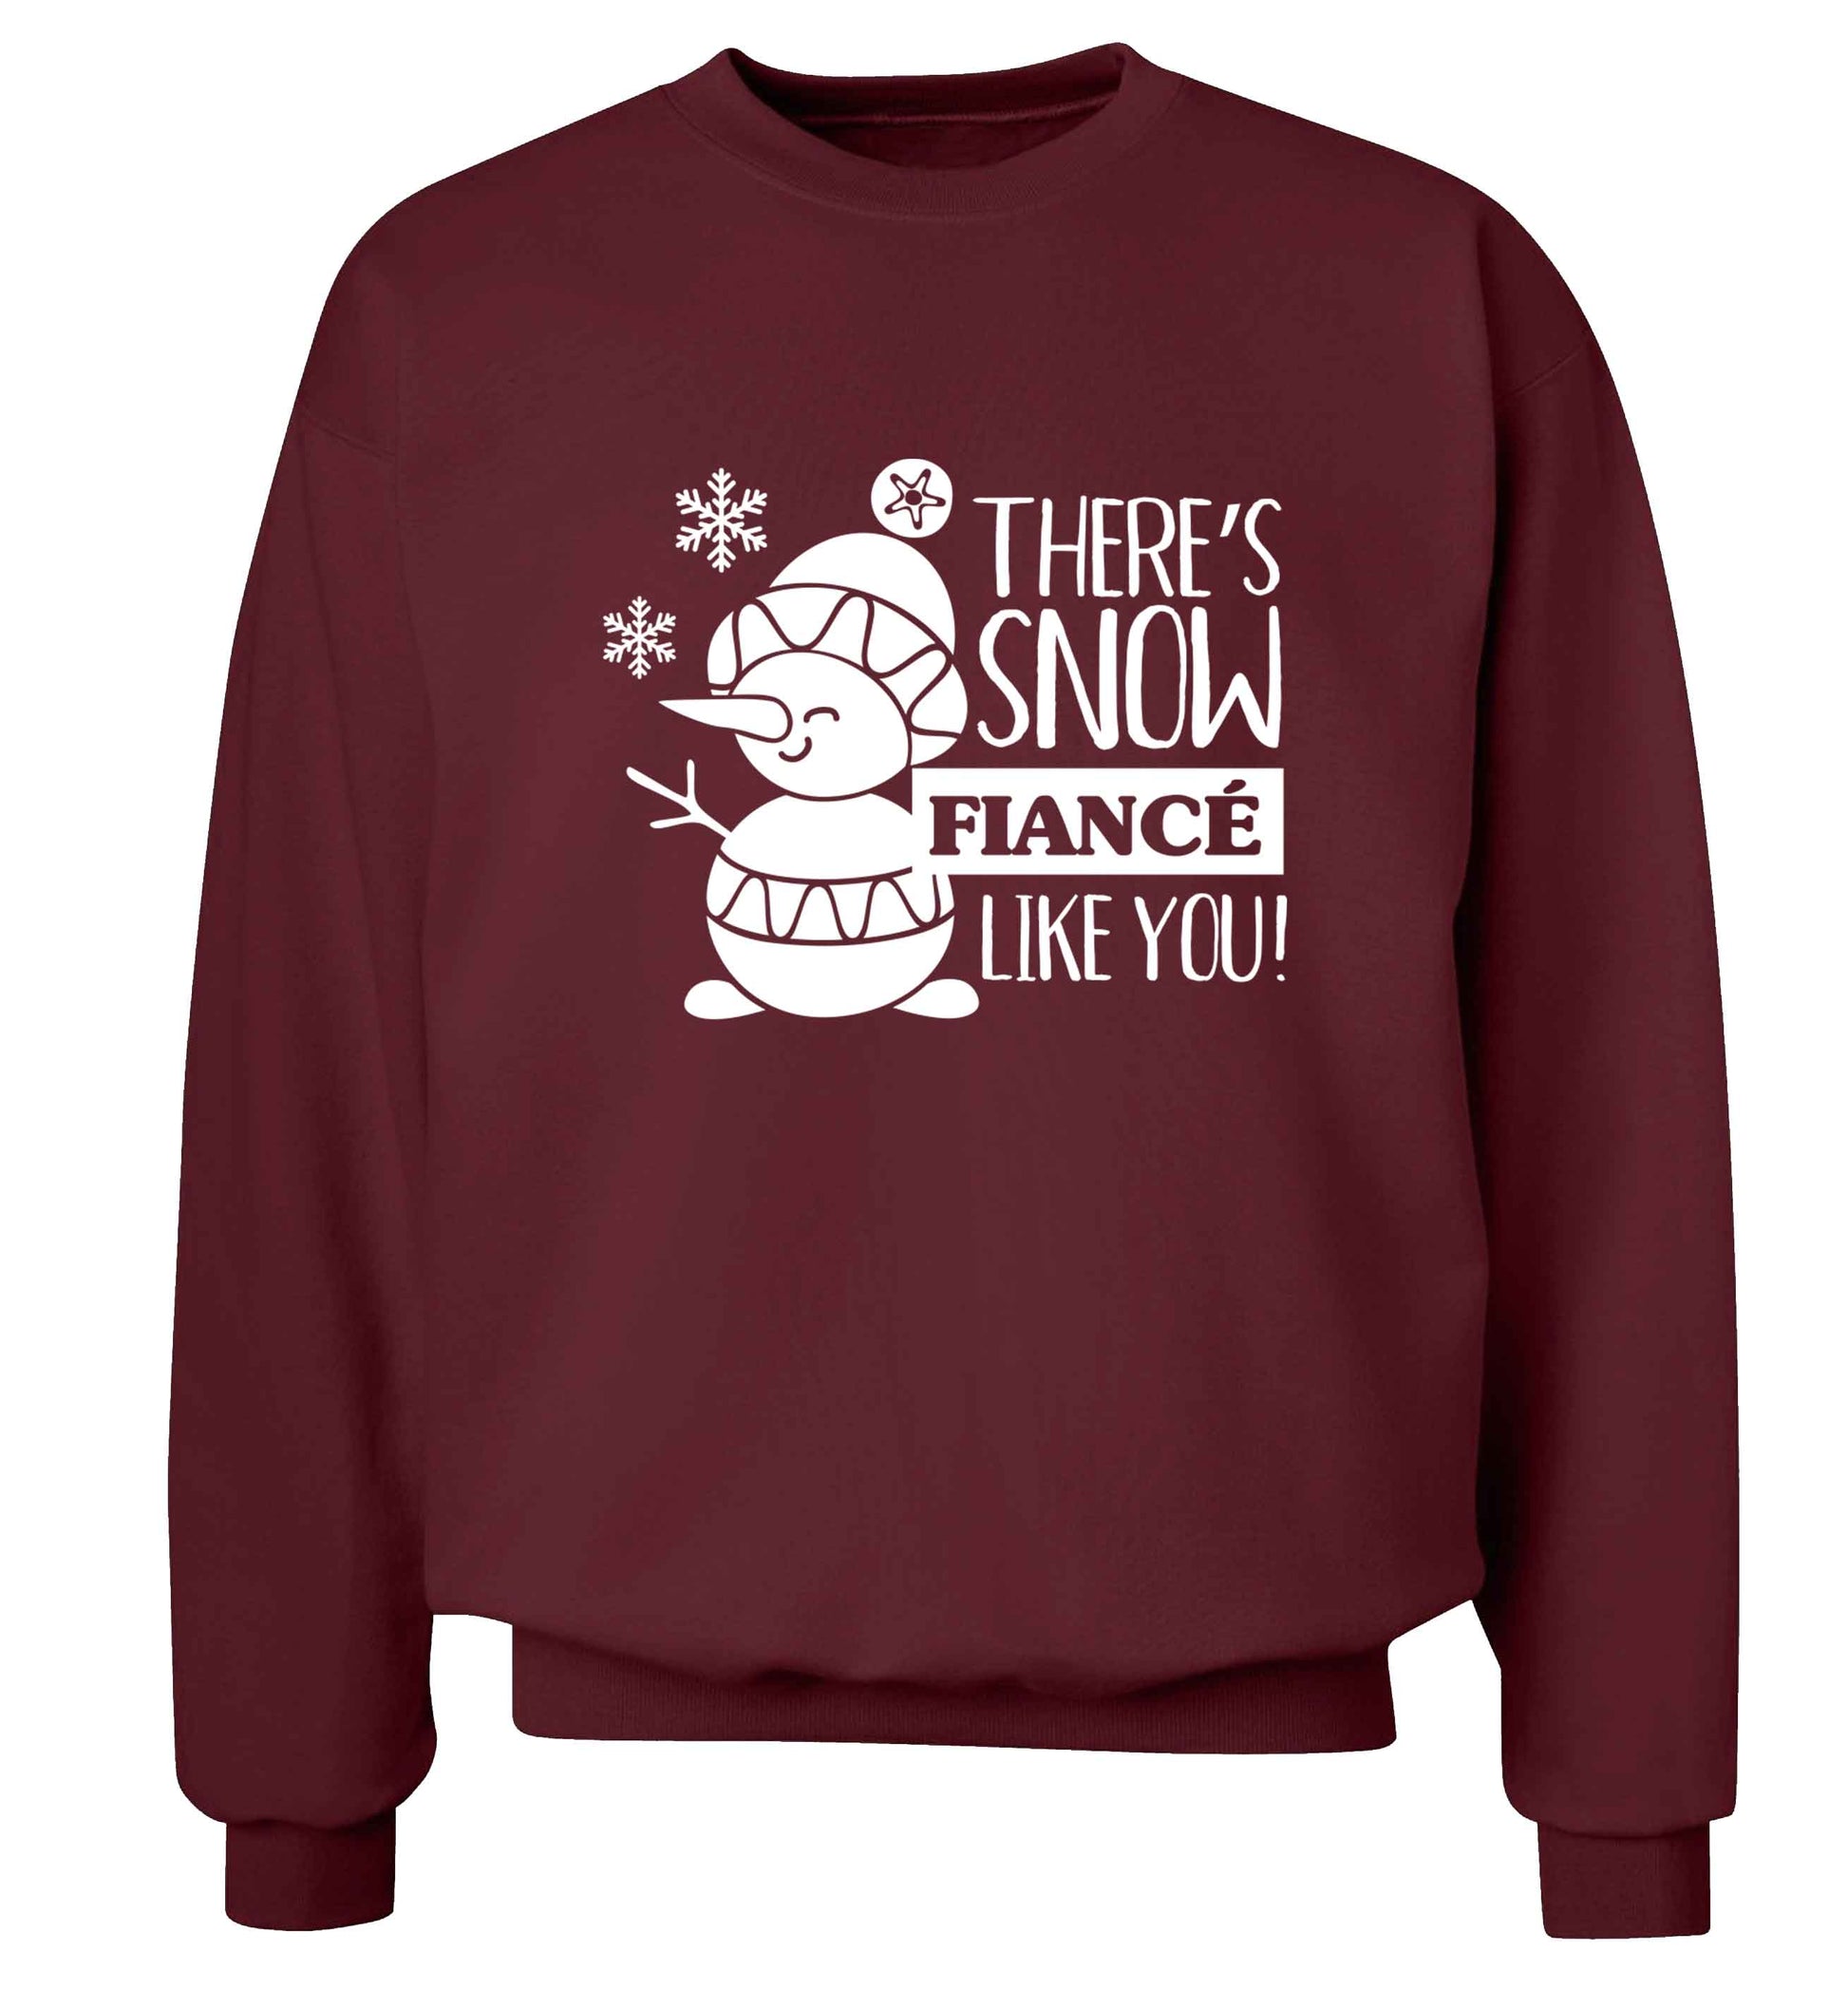 There's snow fiance like you adult's unisex maroon sweater 2XL